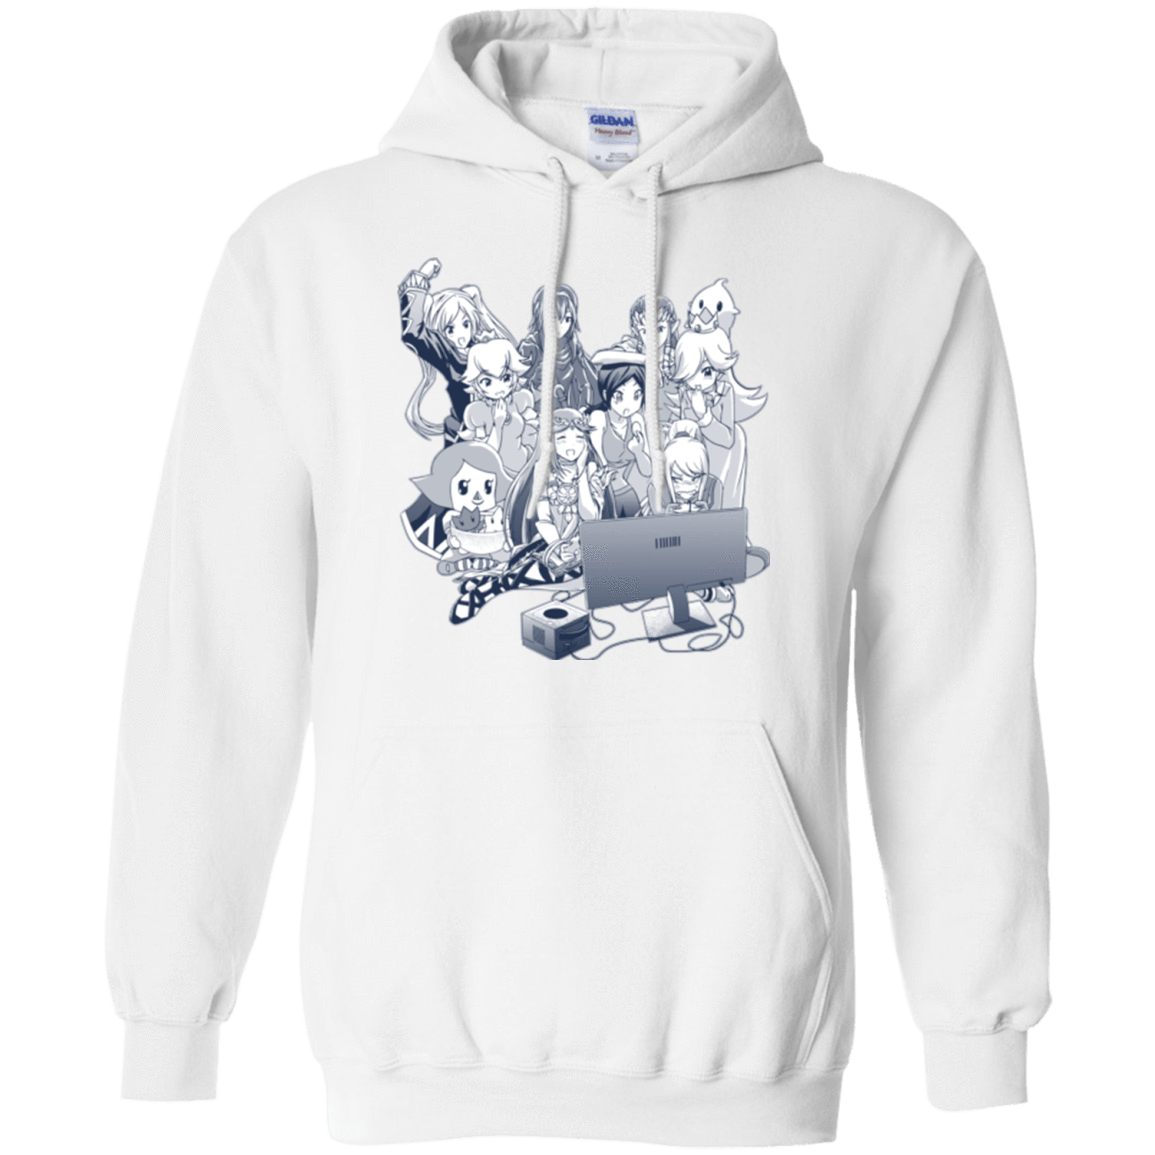 Sweatshirts White / Small Girls Night Out Pullover Hoodie